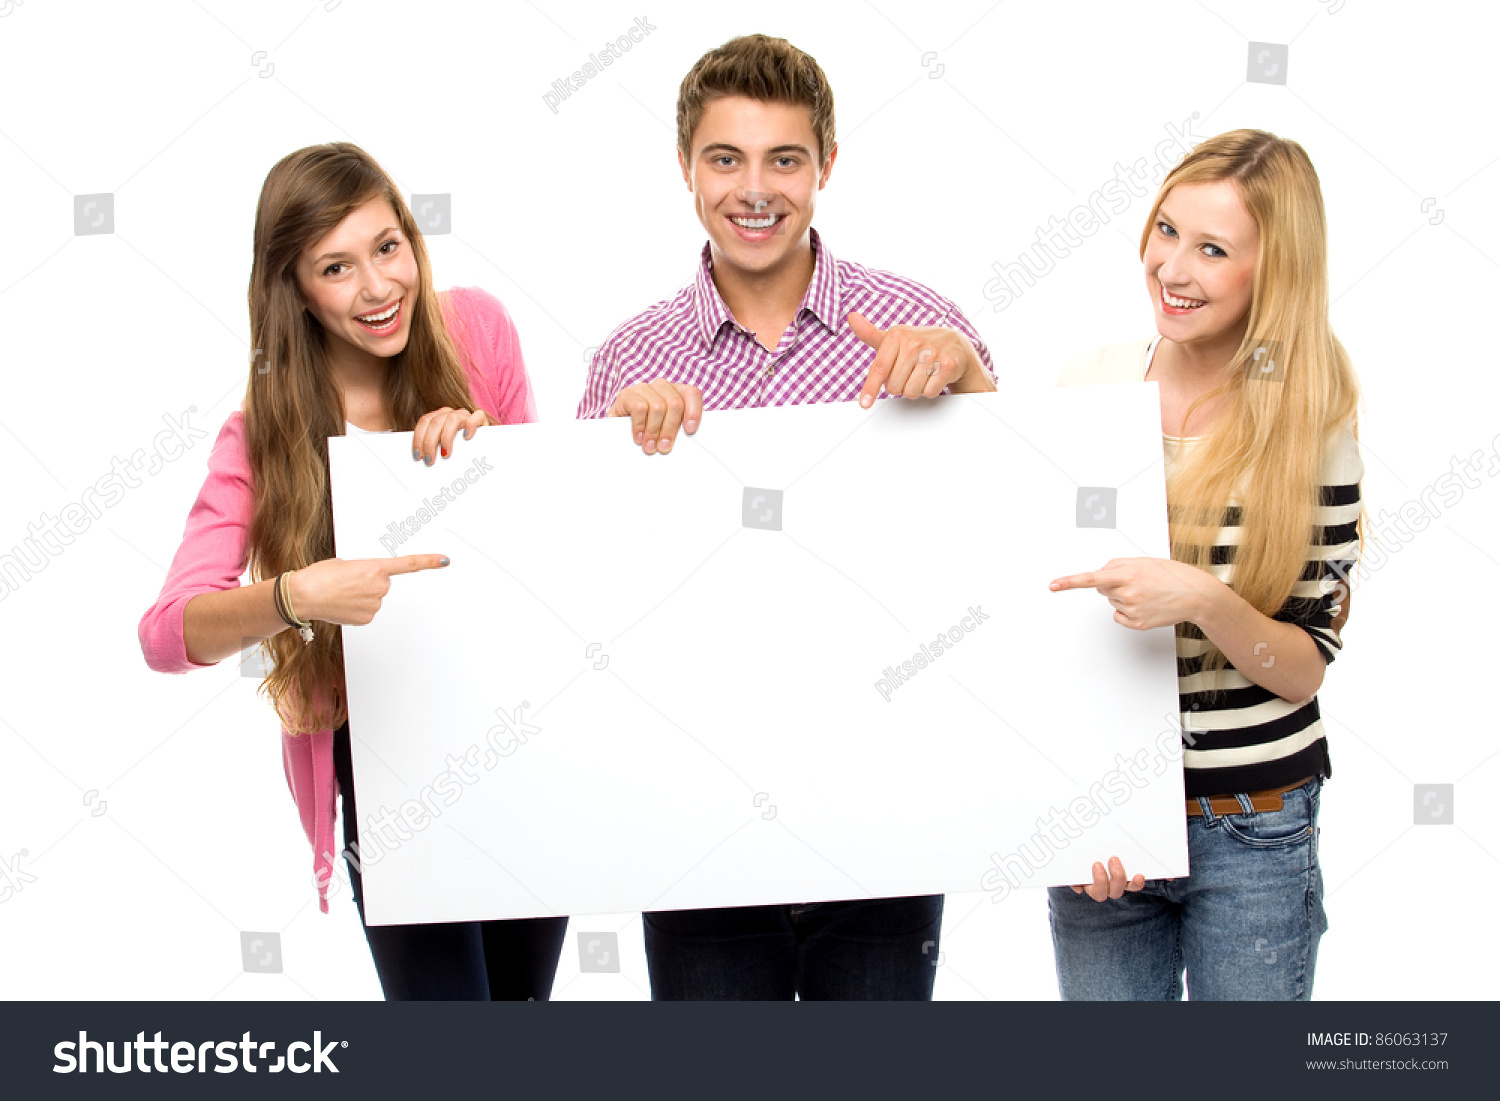 Three Young People Holding Blank Poster Stock Photo 86063137 - Shutterstock